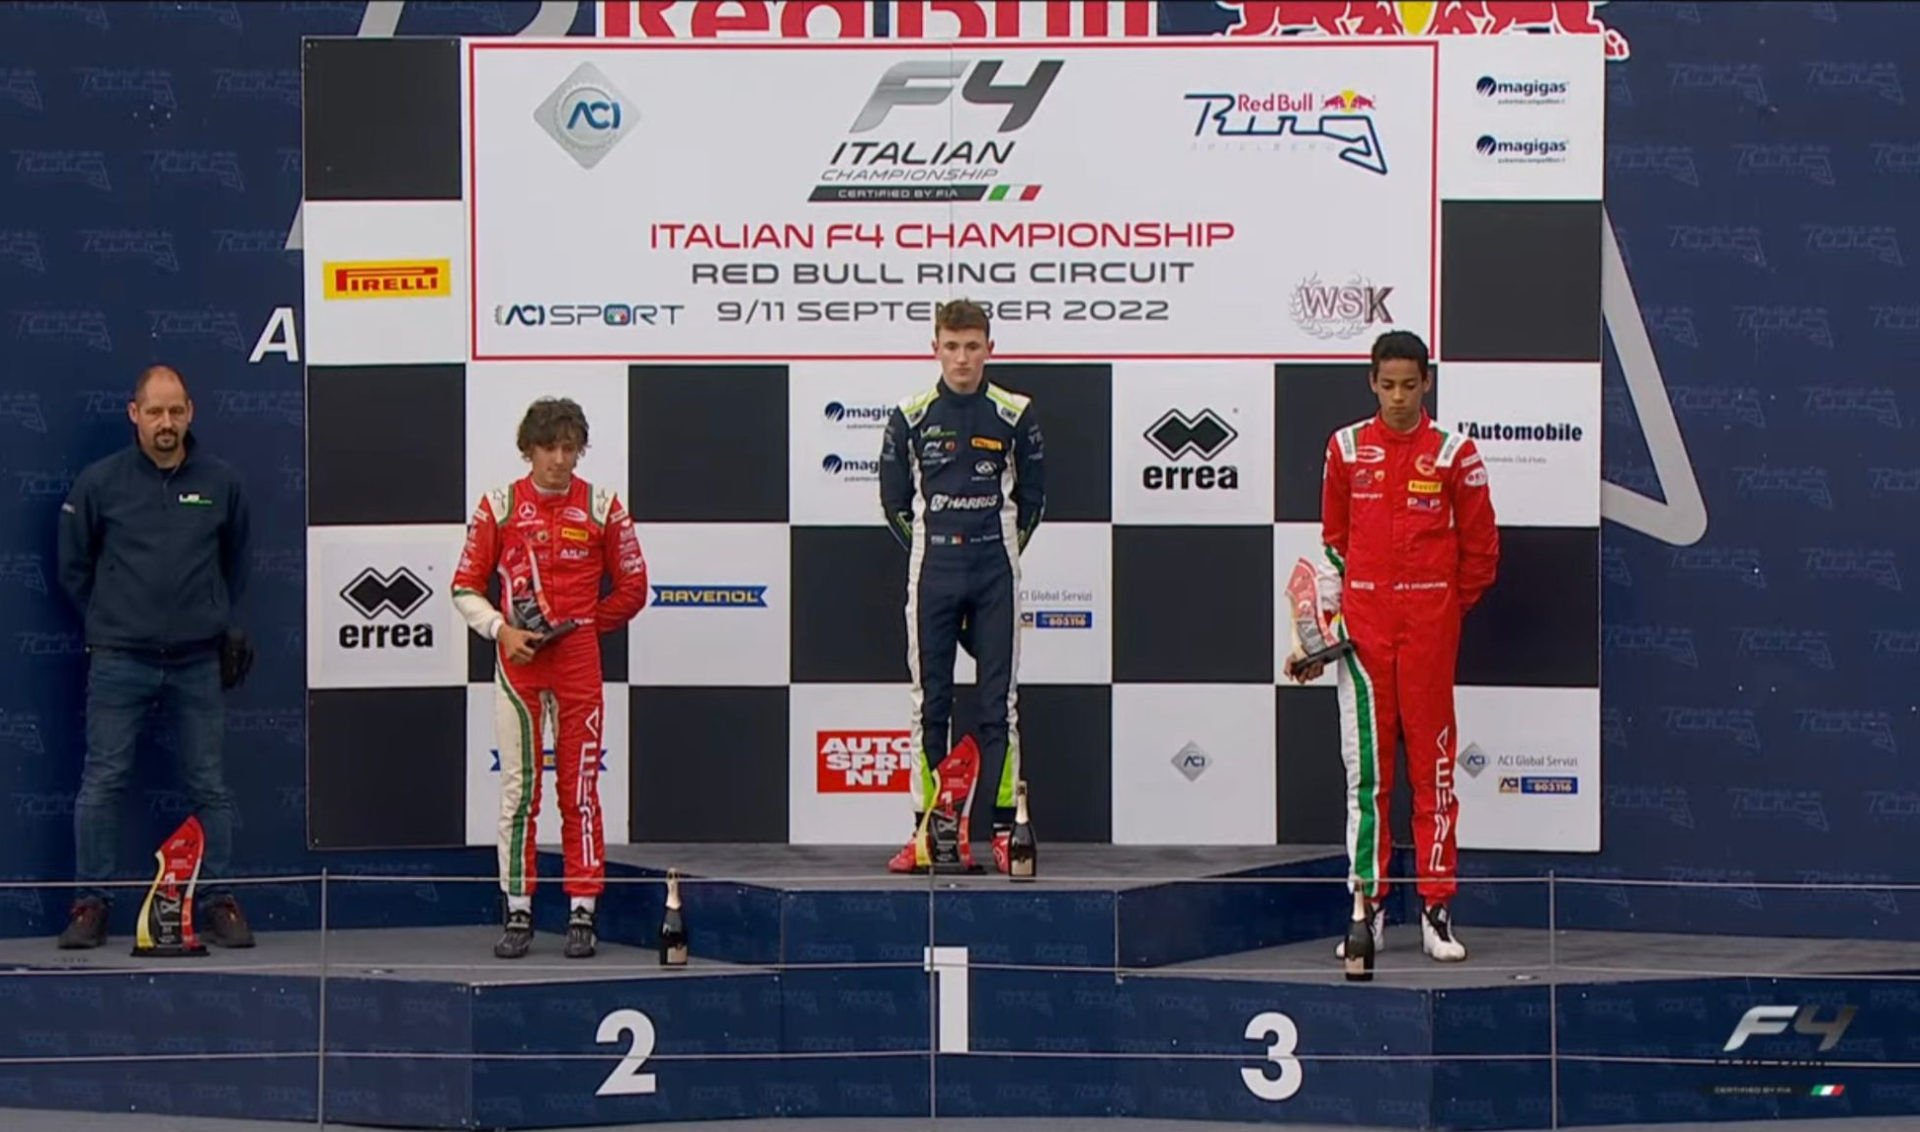 Alex Dunne on the podium after his Formula 4 win in Austria this weekend.